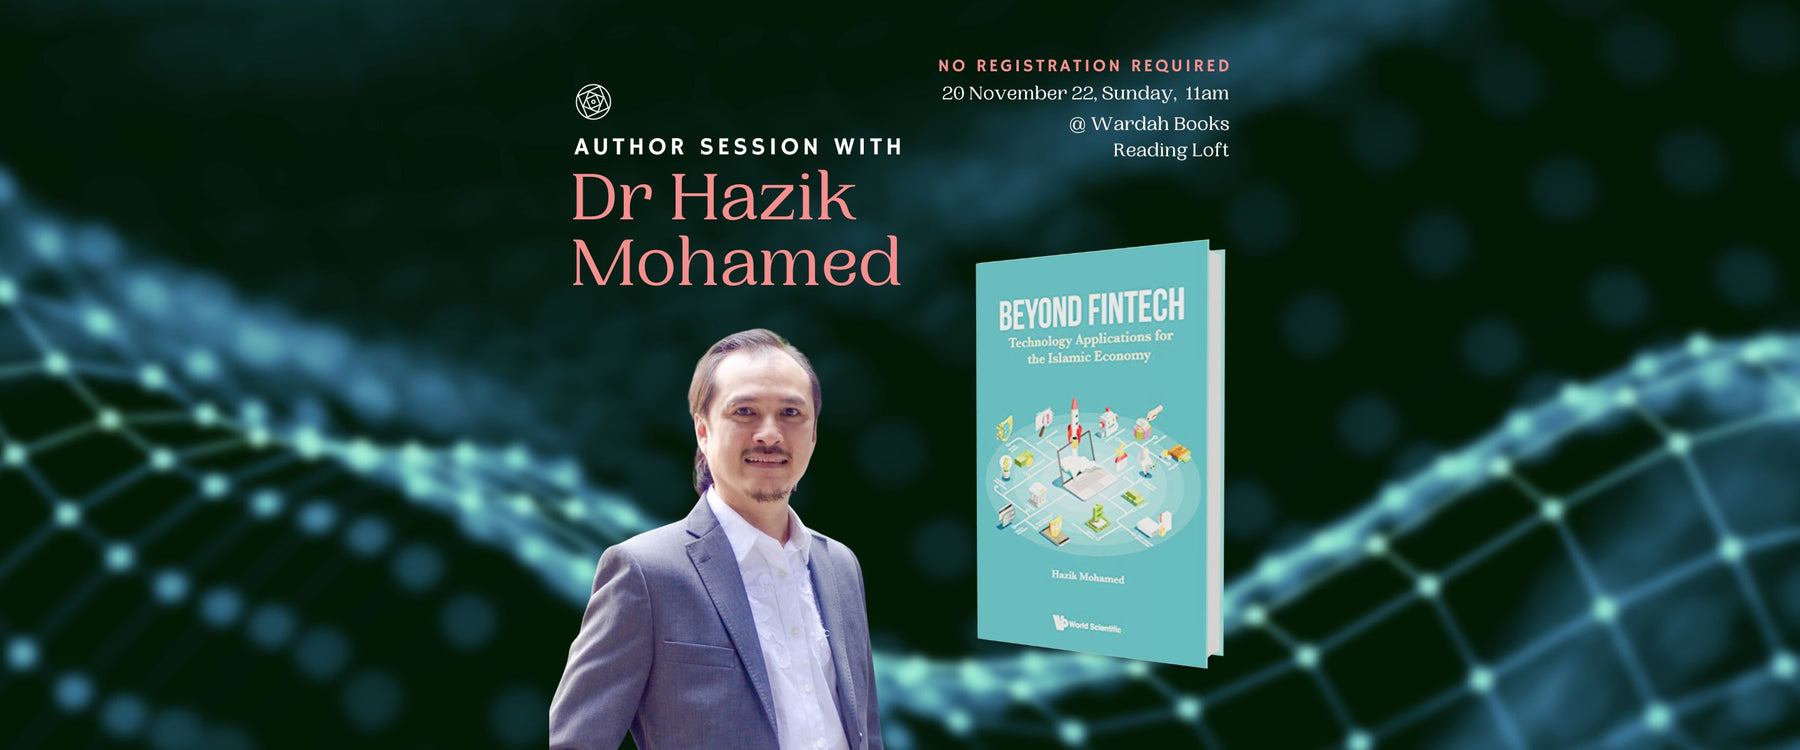 Author Session with Dr Hazik Mohamed